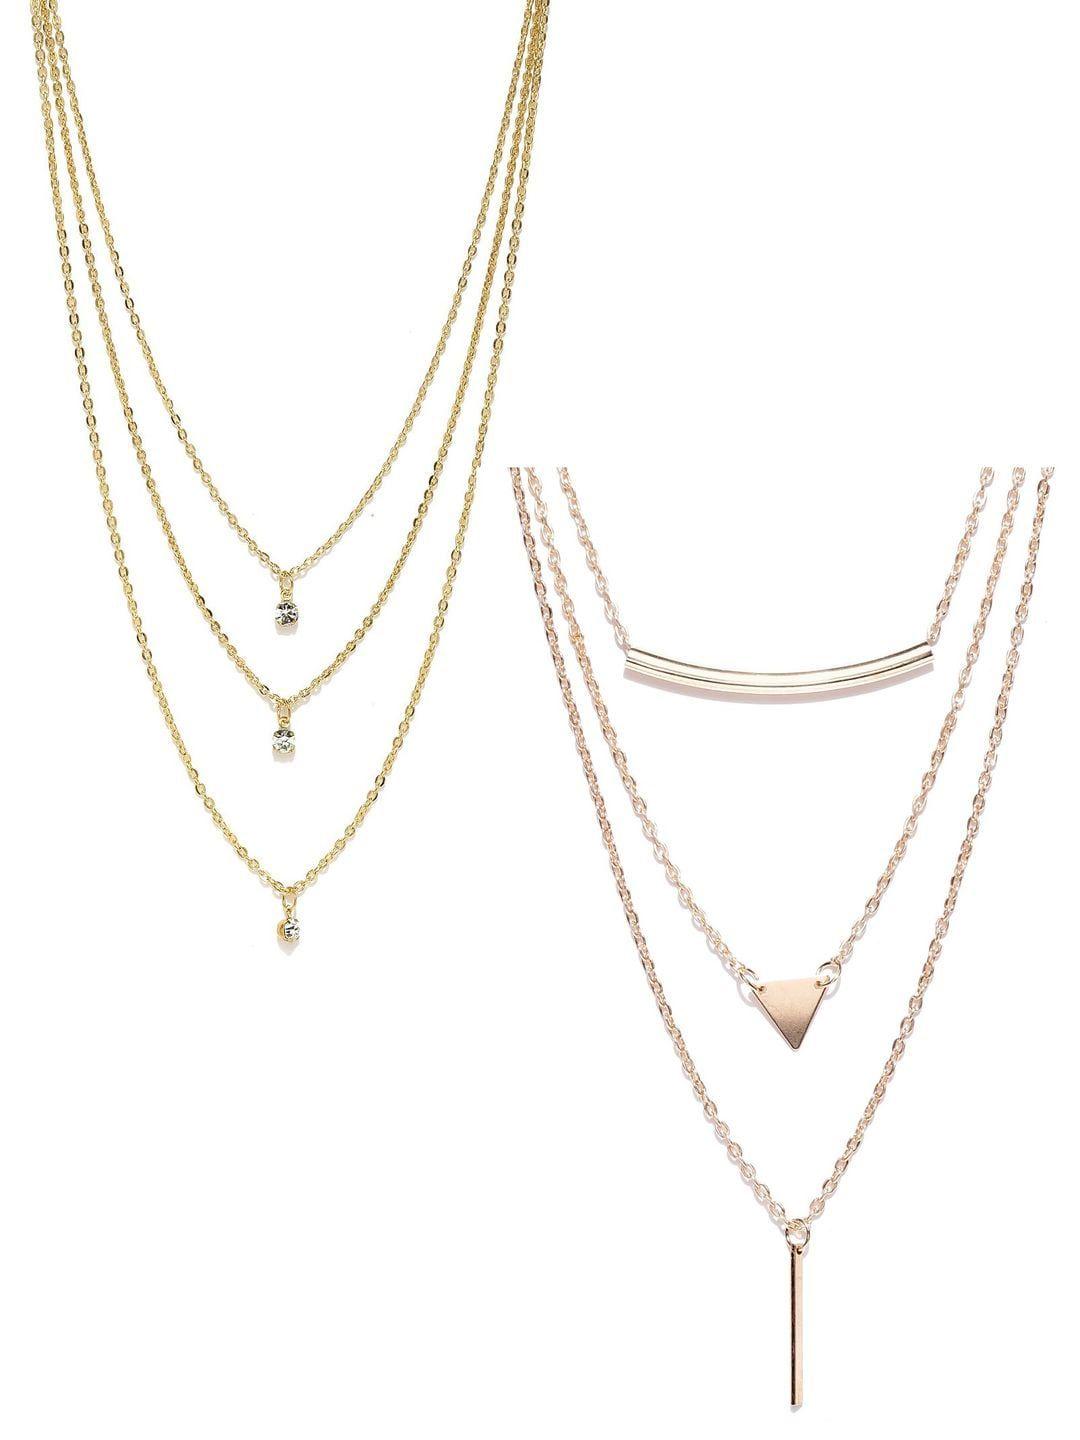 oomph set of 2 gold-toned layered necklaces